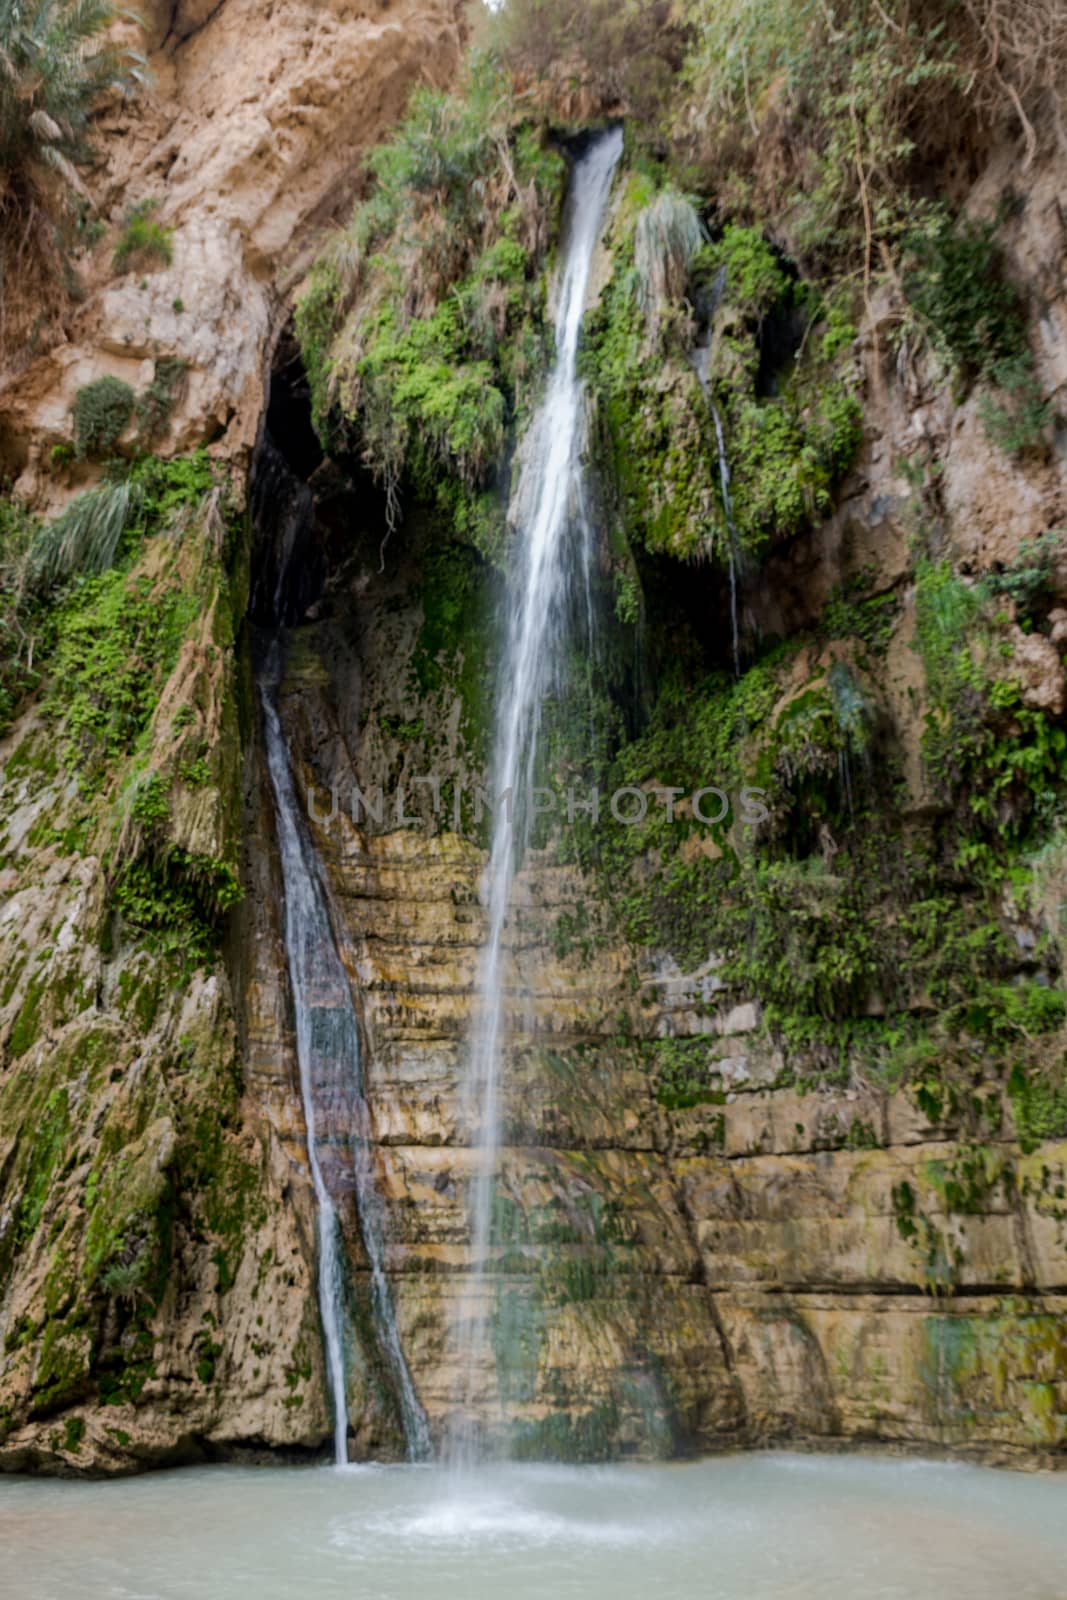 The Waterfall in national park Ein Gedi by compuinfoto